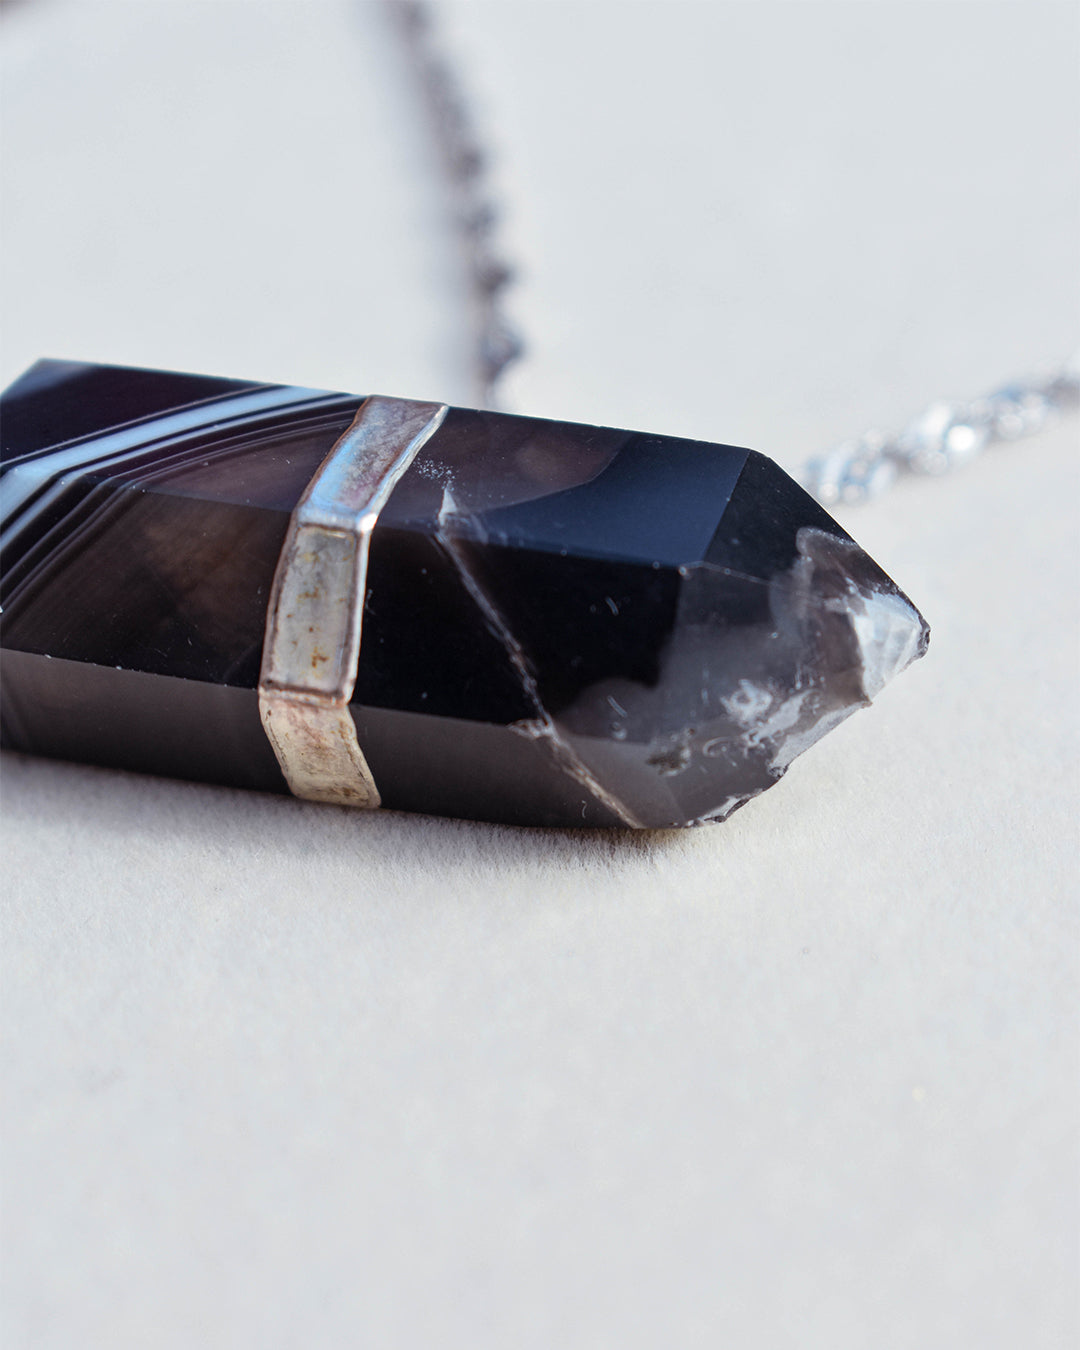 Stainless Steel chain with Agate crystal pendant